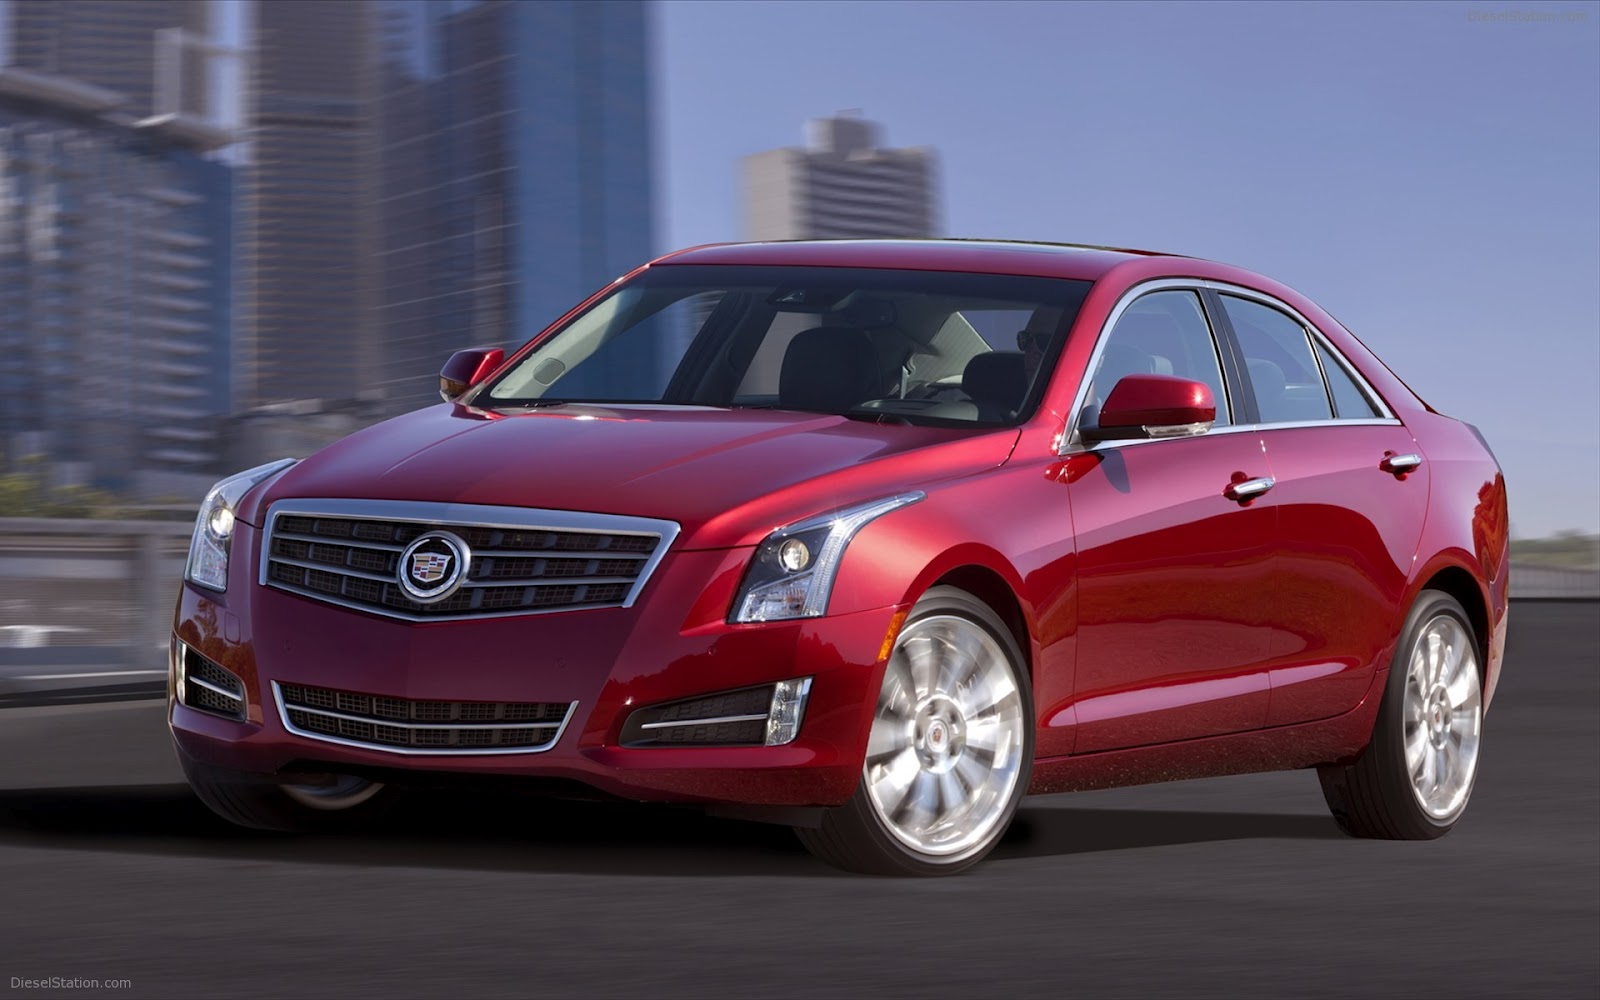 IgnitionSpeed: 2013 Cadillac ATS - Car Reviews and Comparisons